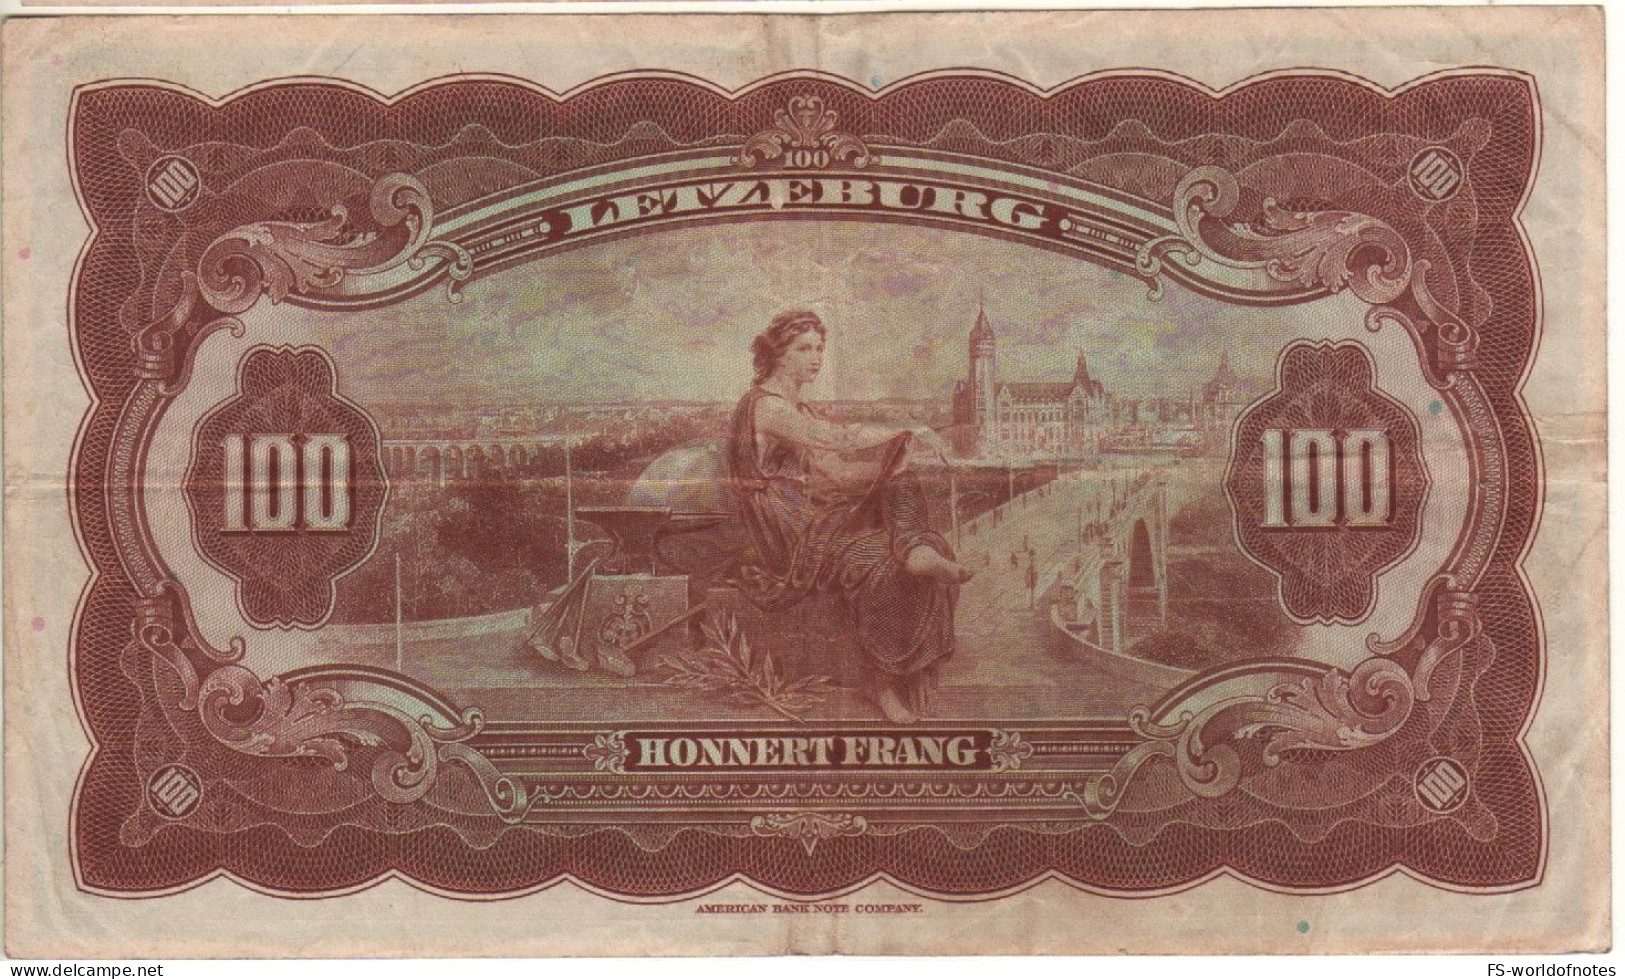 LUXEMBOURG 100 Francs   P47a  1944  (Grand Duchess Charlotte +  Allegorical Woman, Adolphe Bridge, Luxembourg  On Back) - Luxemburg